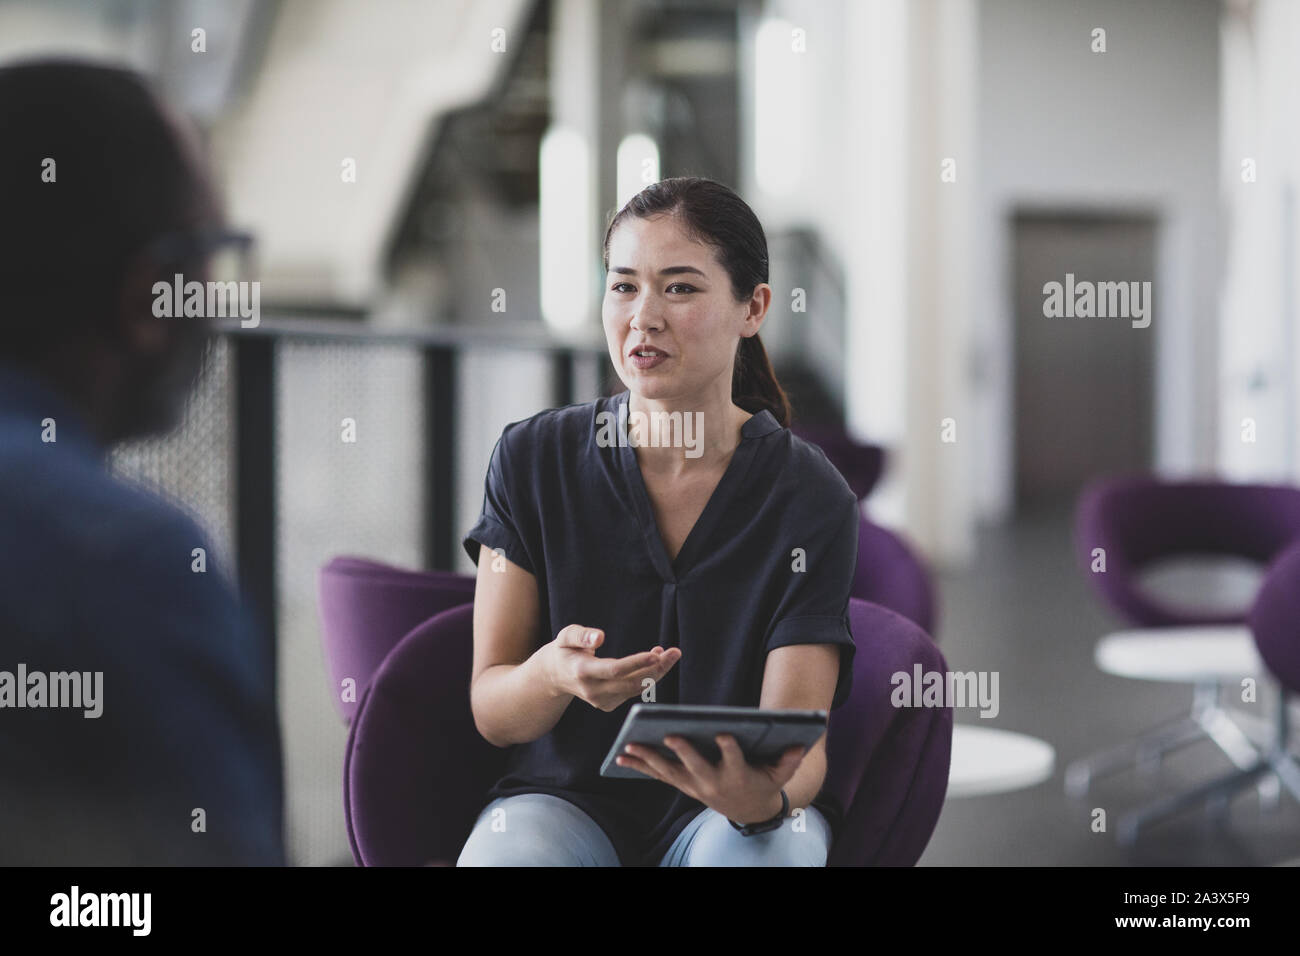 Businesswoman using a digital tablet in a meeting Banque D'Images